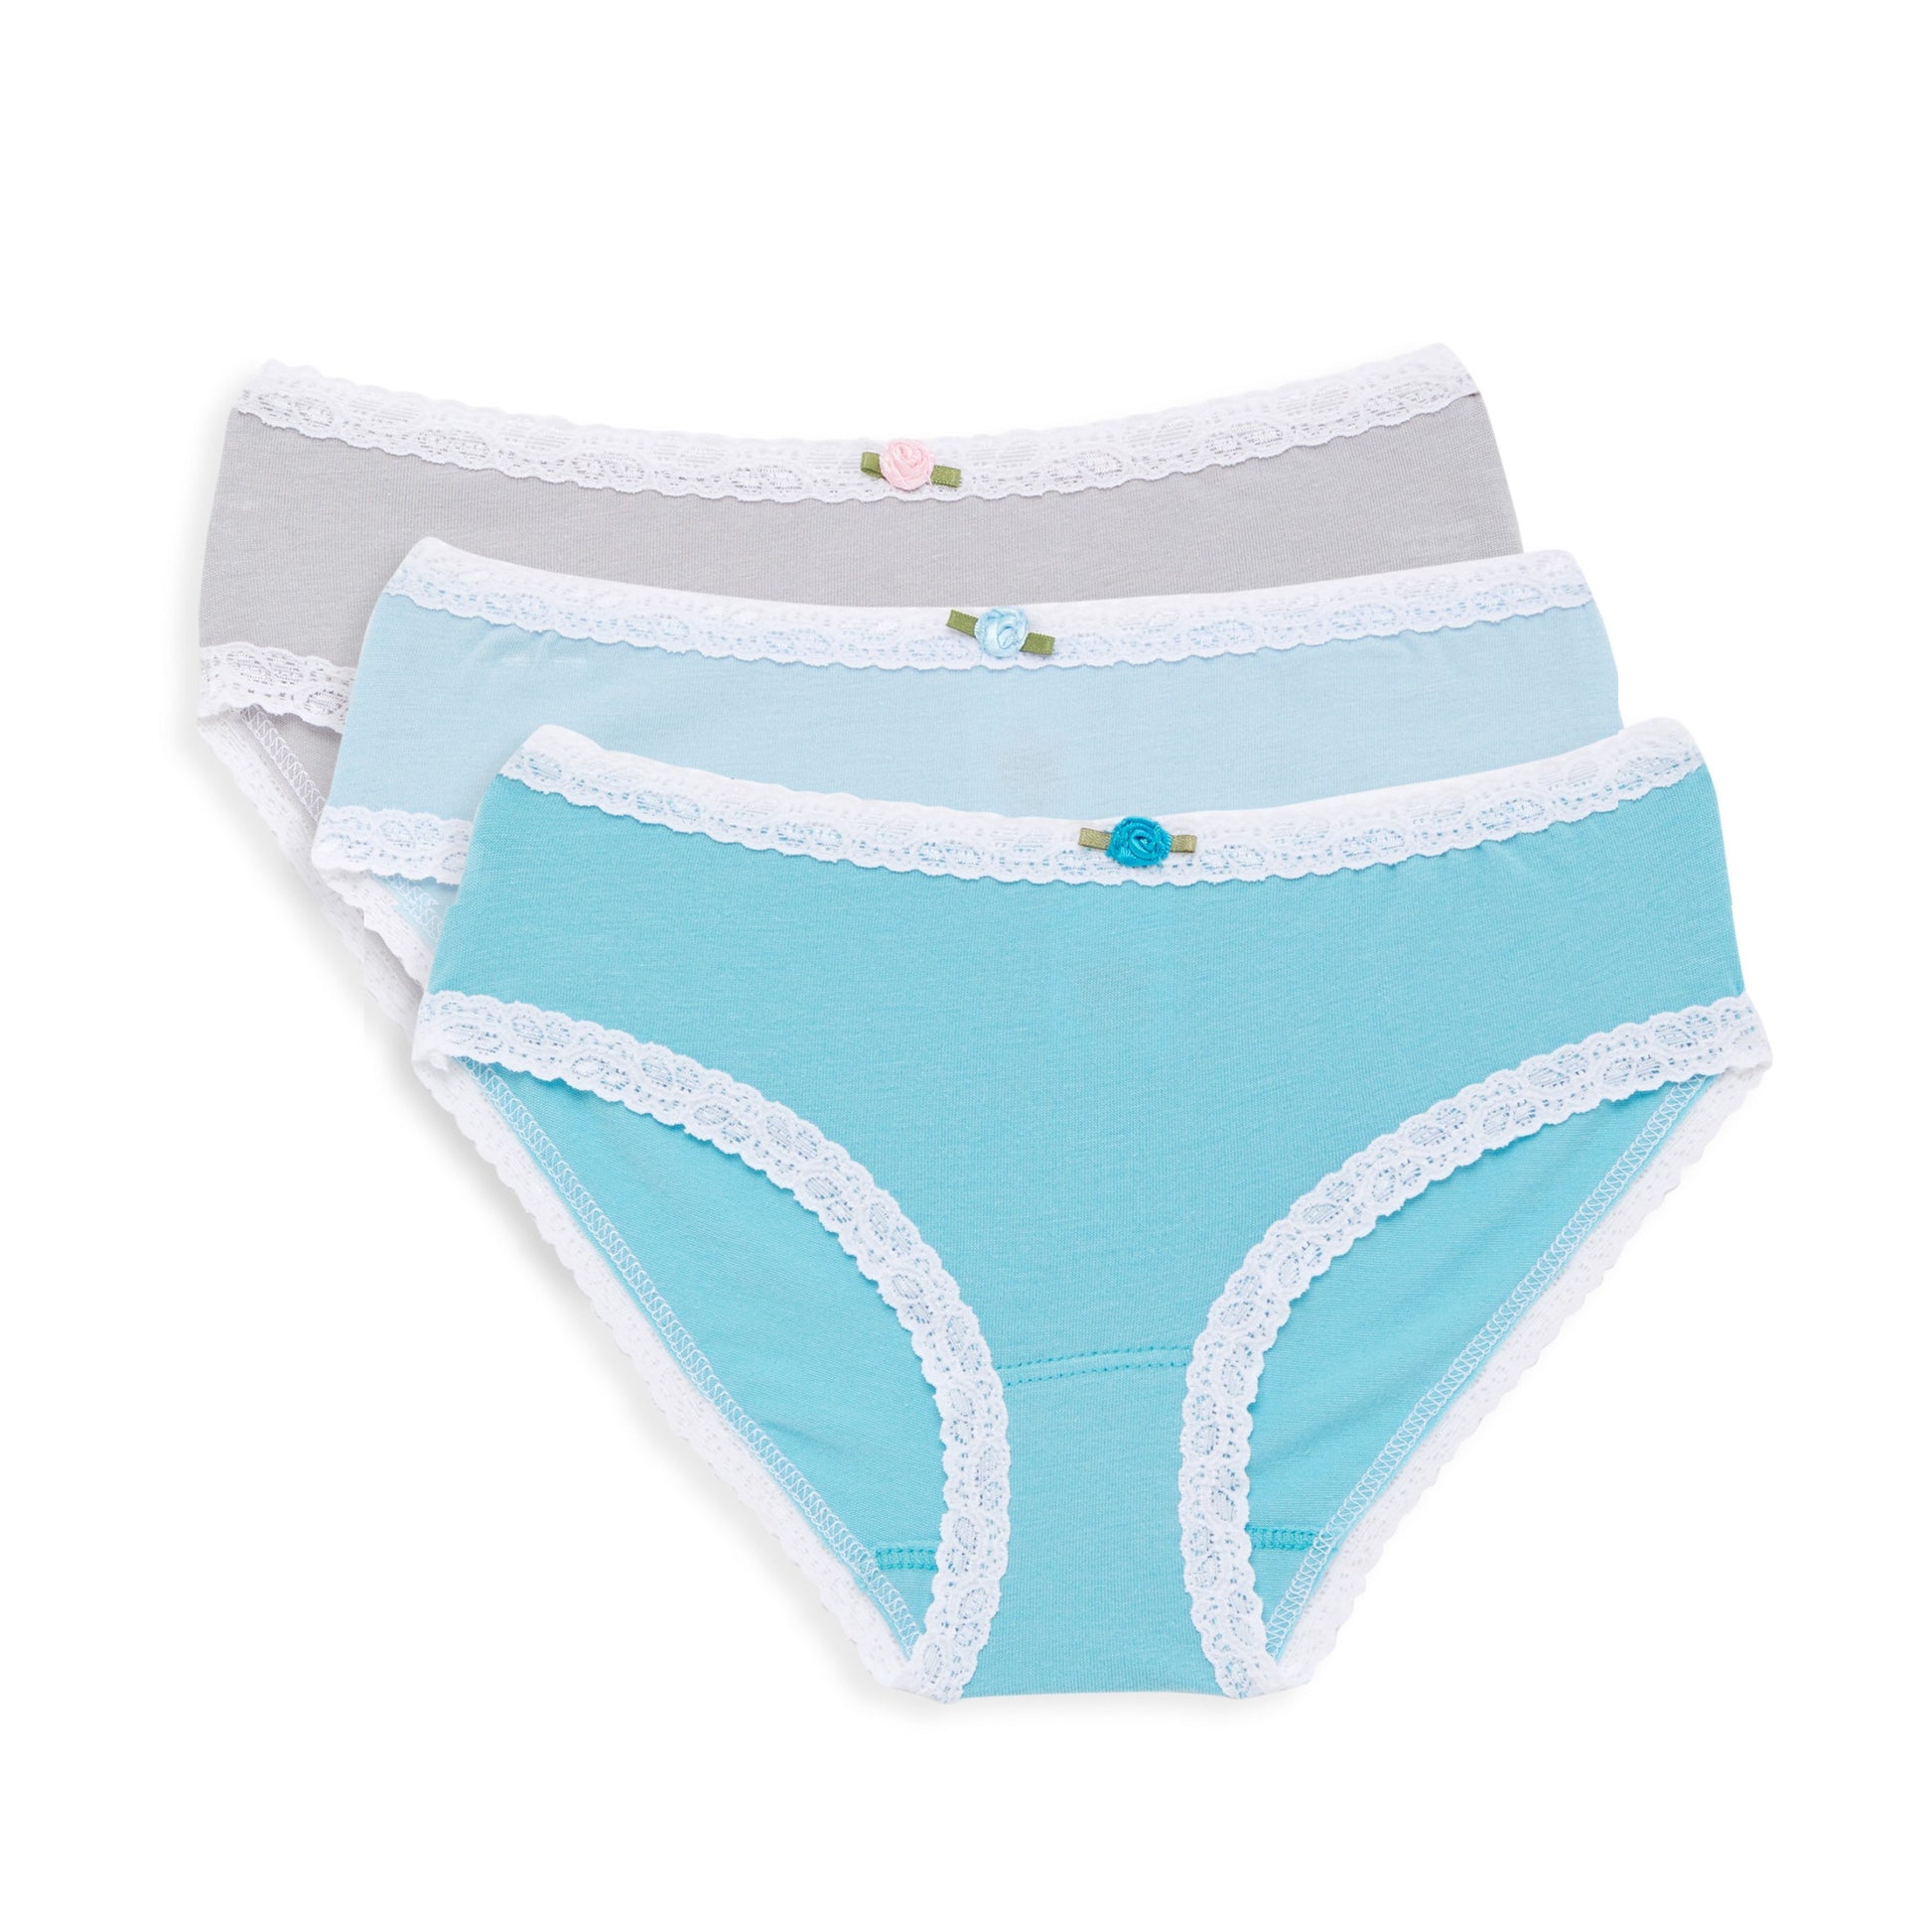  ESME Little Girl's Panty Size X-Small 2-3 ALL Grey